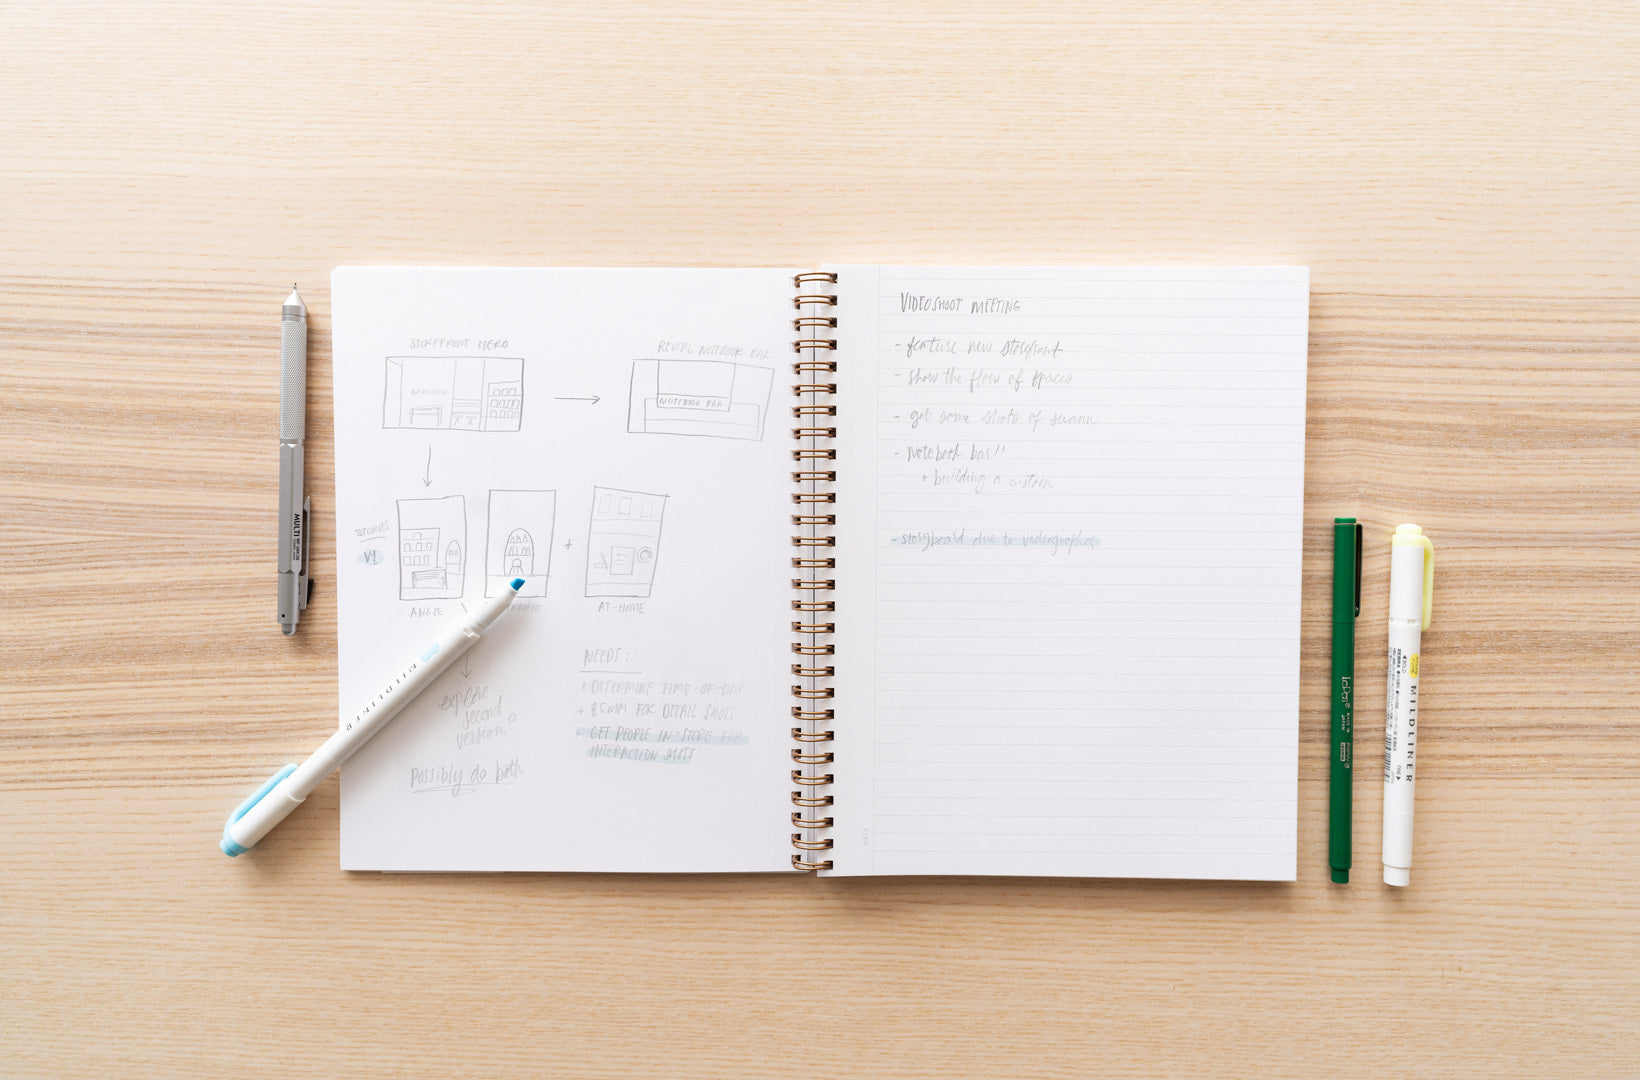 A notebook lies open to show hand-drawn lists & charts with various writing utensils alongside.